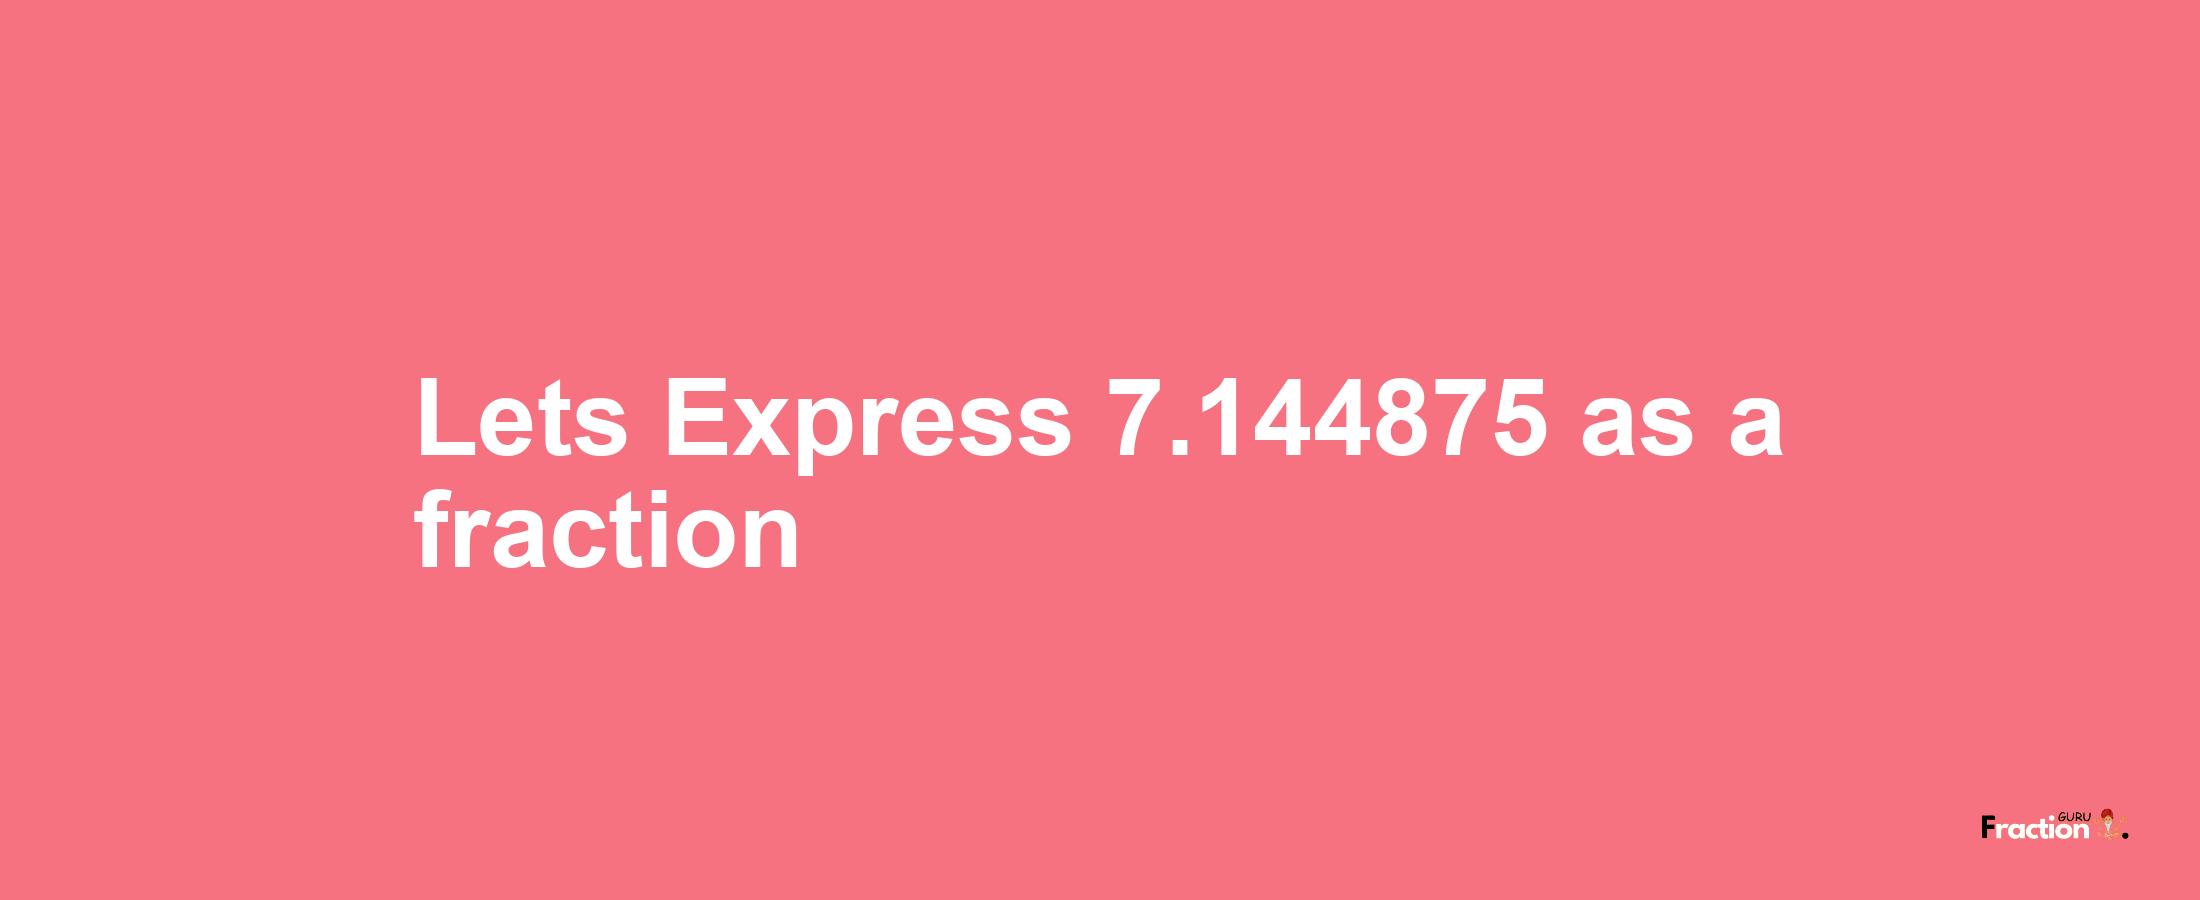 Lets Express 7.144875 as afraction